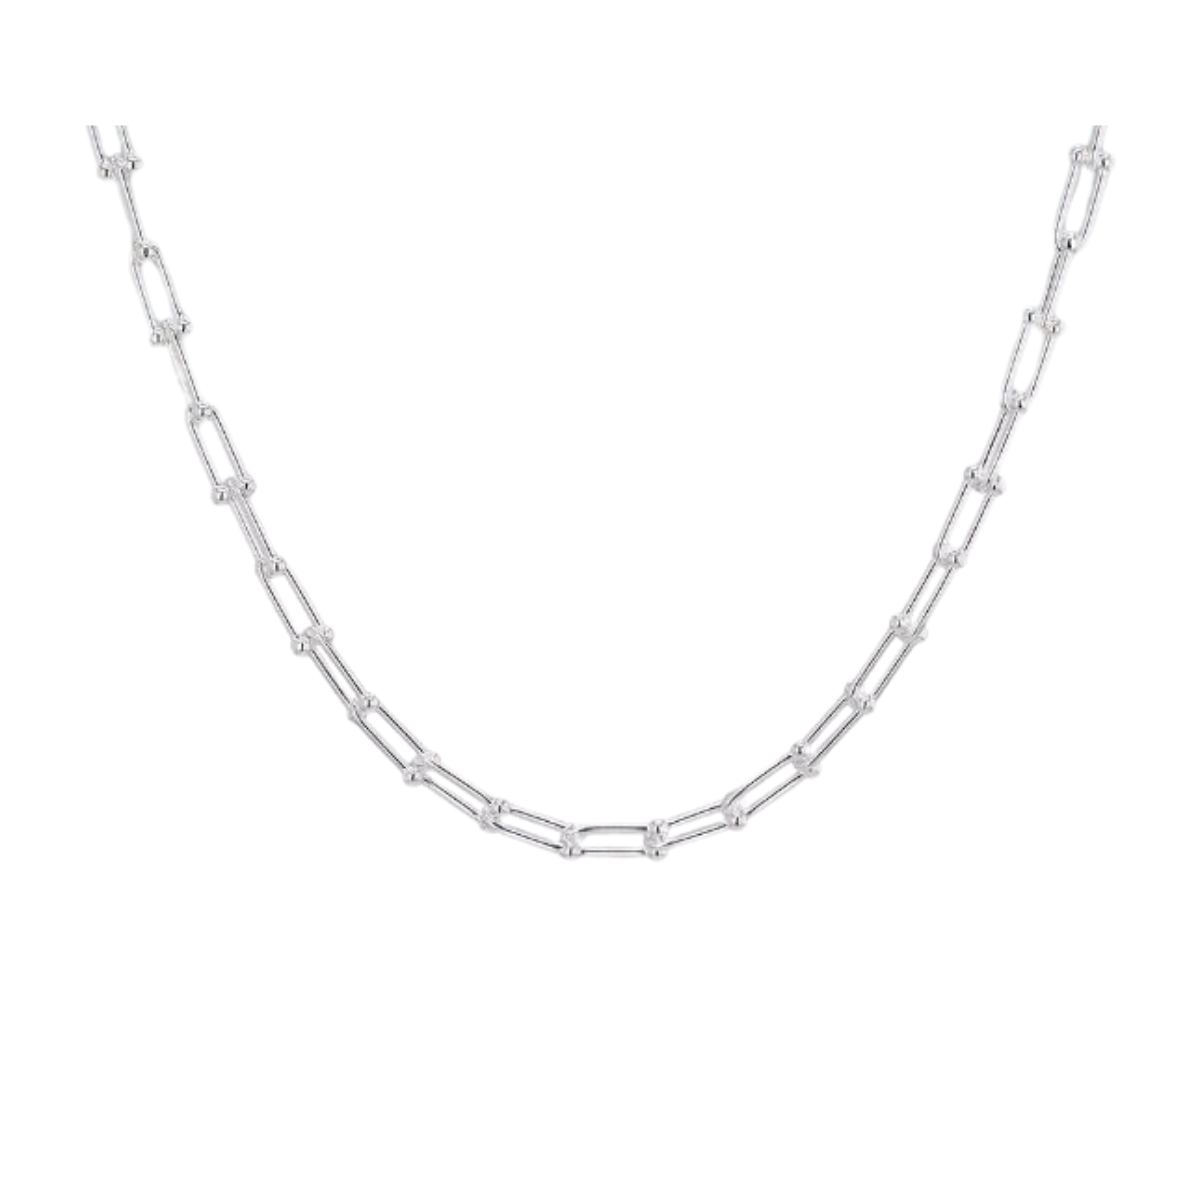 925 Sterling Silver 6.5mm Industrial Chain Necklace - 51cm Length, Polished Finish, Lobster Clasp